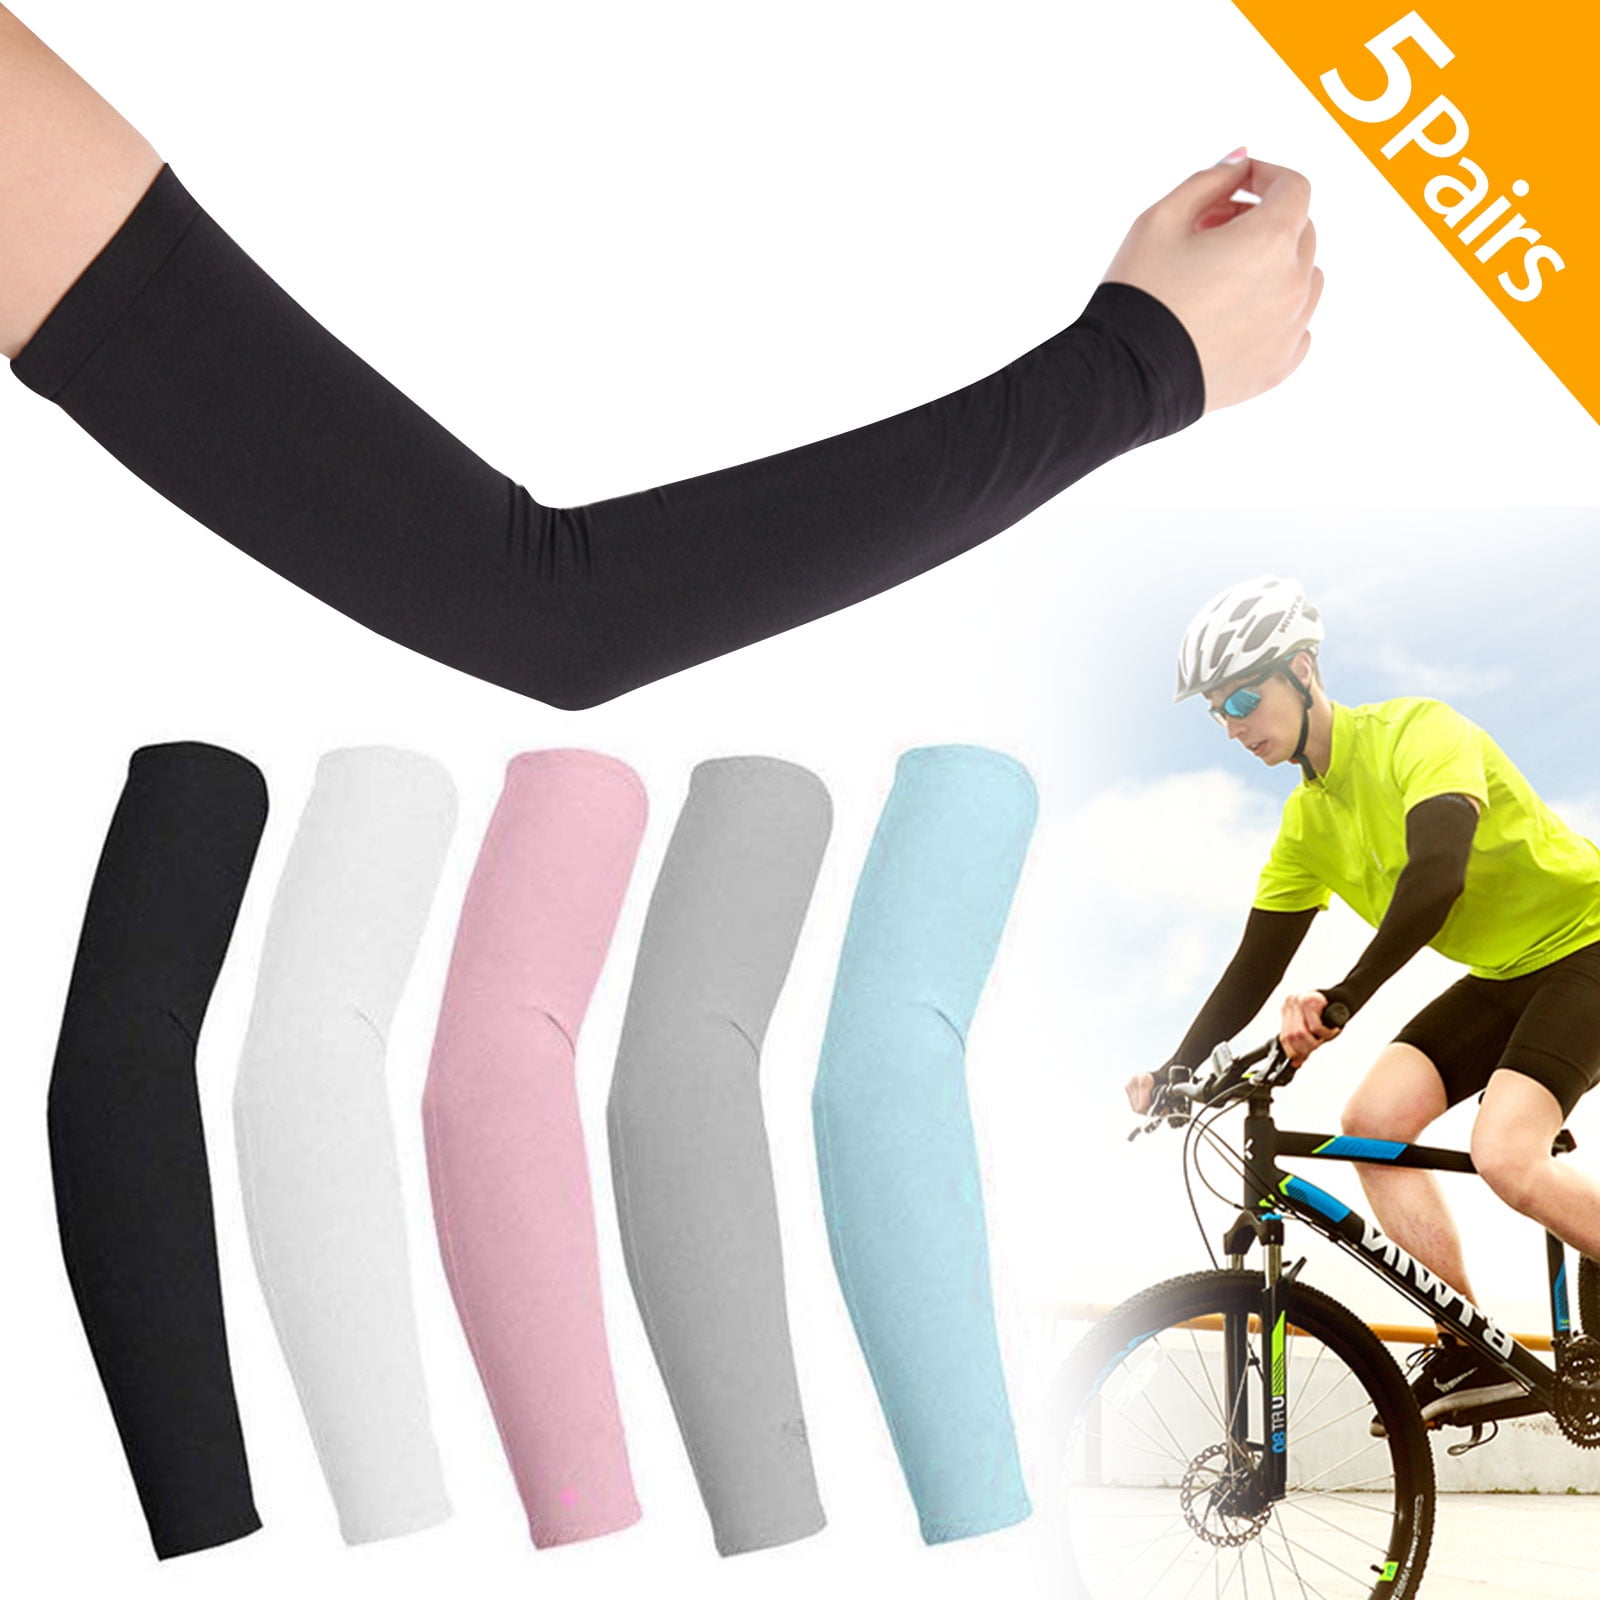 5 Pair Cooling arm sleeves Sun Protective UV Cover You pick color US SELLER 